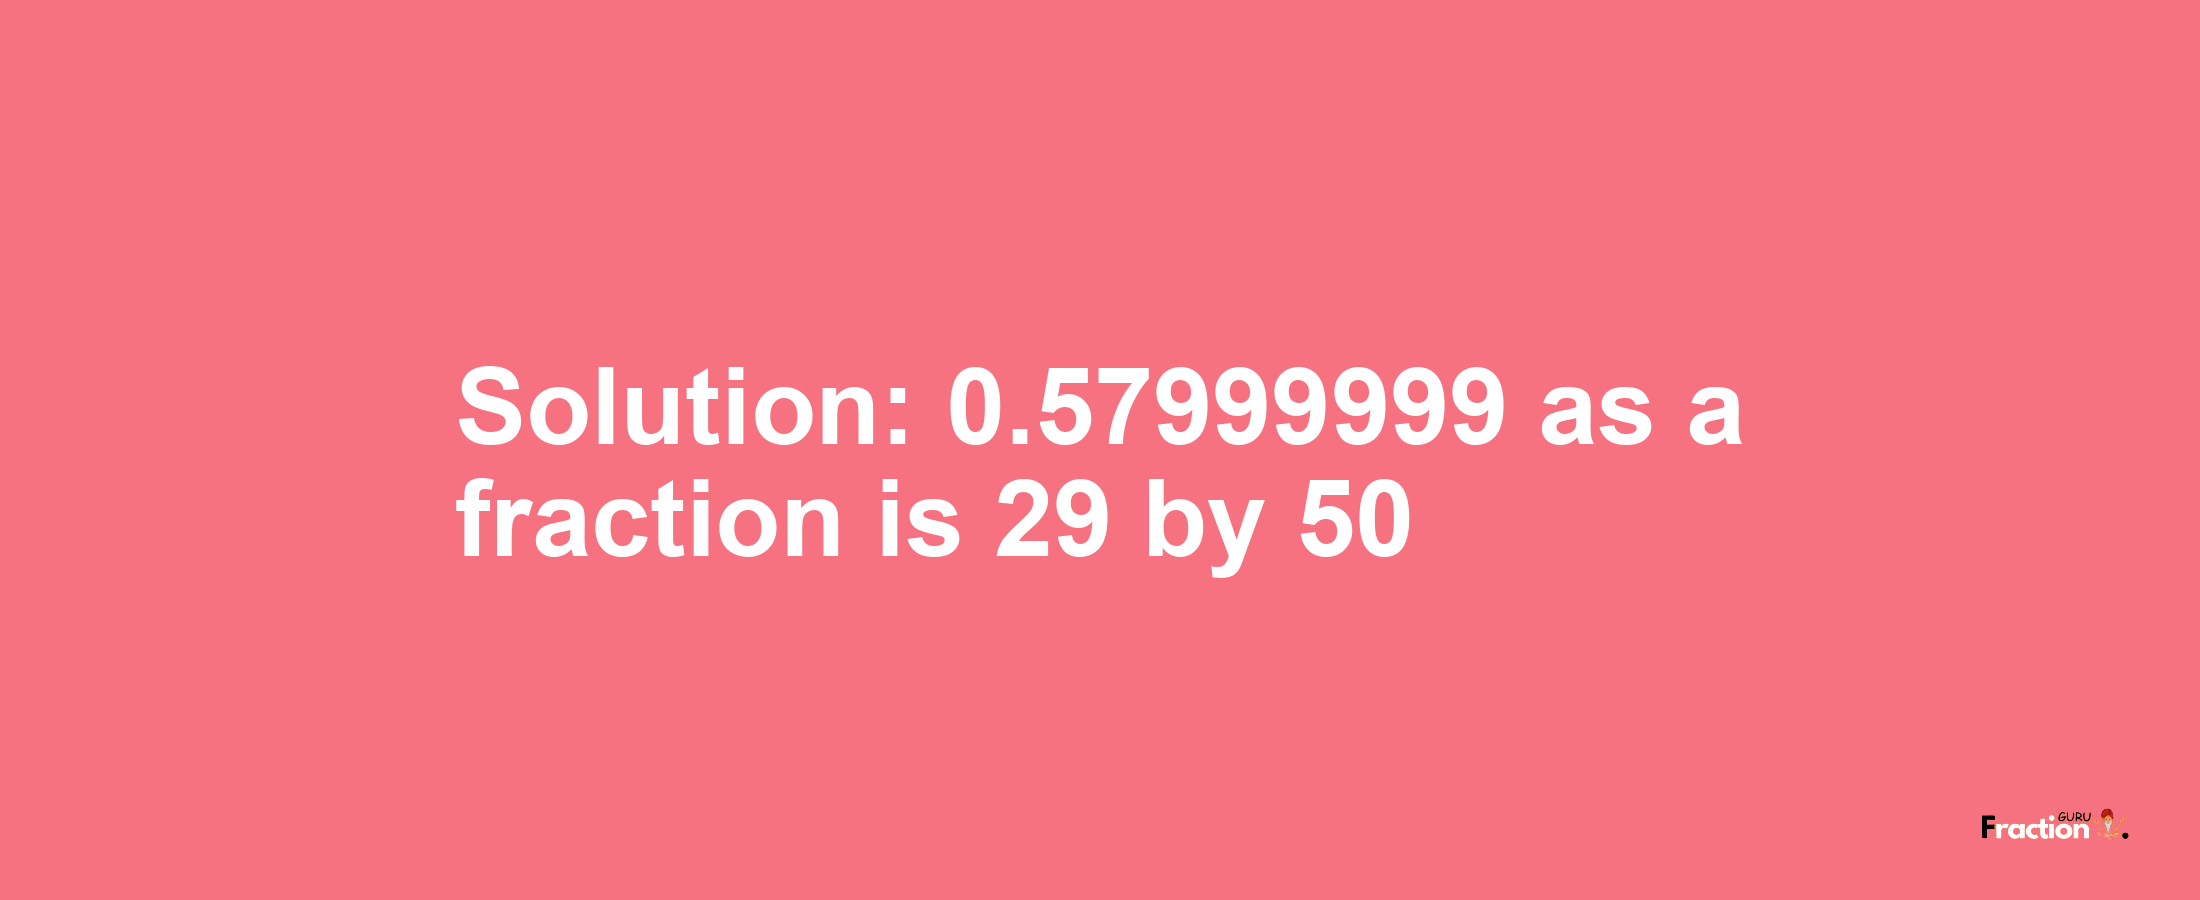 Solution:0.57999999 as a fraction is 29/50